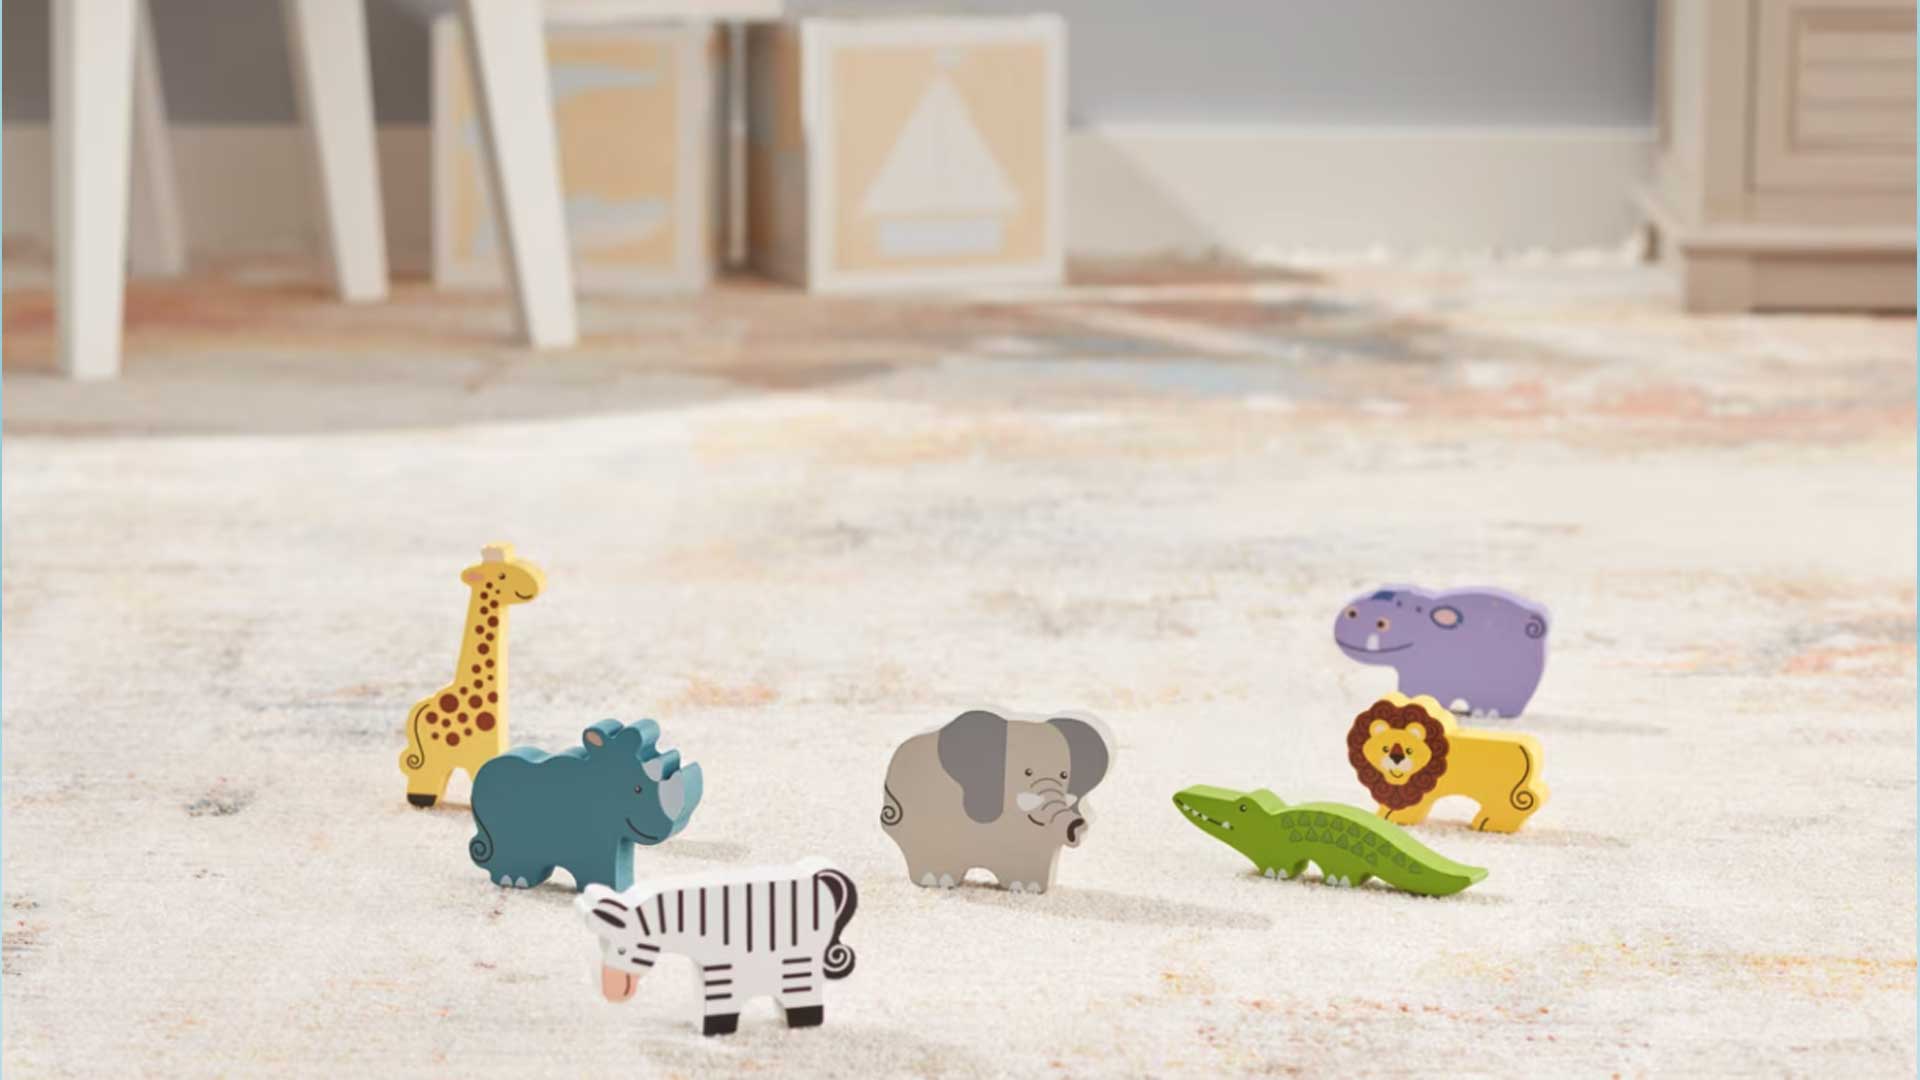 Commercial studio product photography and video production in Westchester, New York for Melissa & Doug safari truck